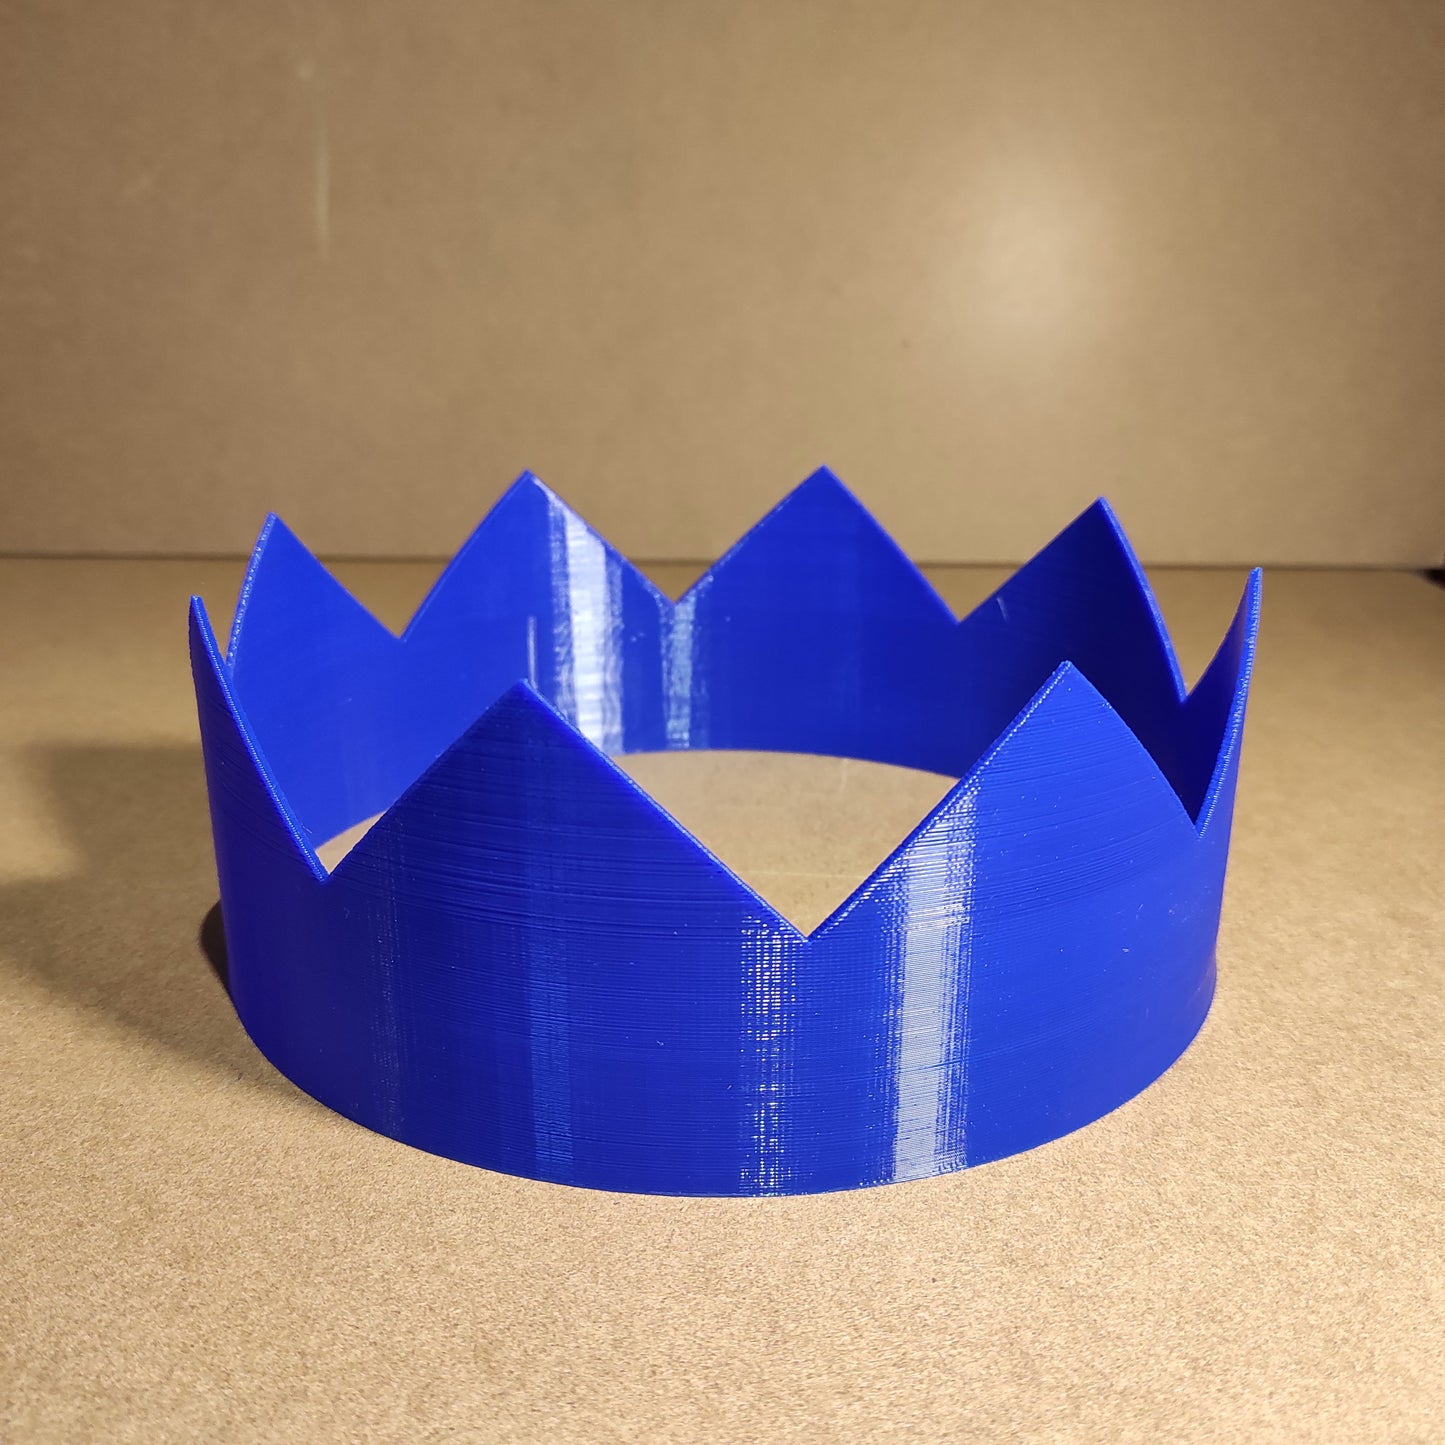 OSRS Party Hat Runescape - Cosplay Prop - Life Size - Inspired by the game! RS Partyhat